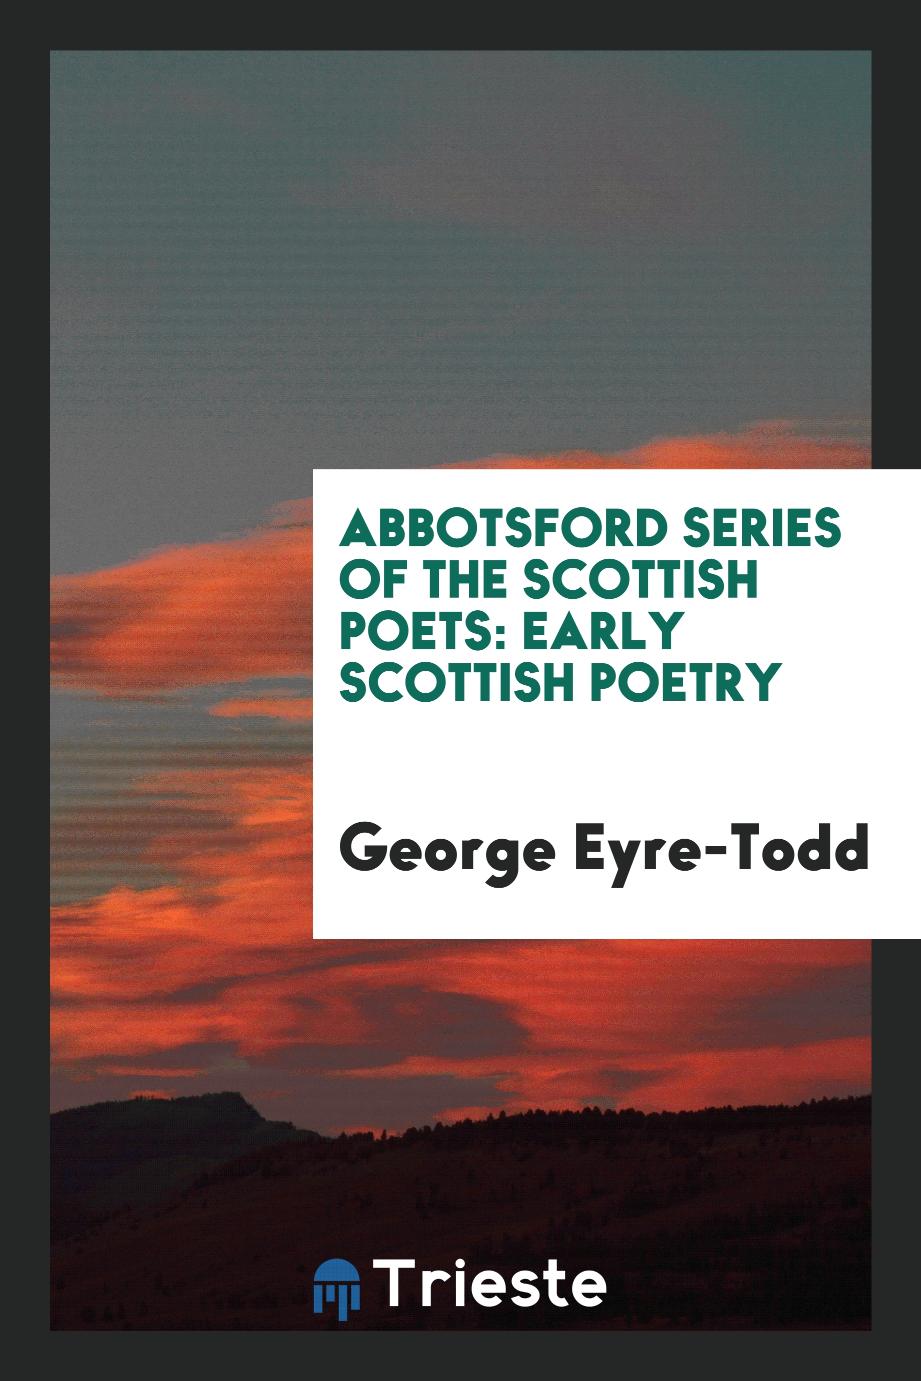 George Eyre-Todd - Abbotsford Series of the Scottish Poets: Early Scottish Poetry